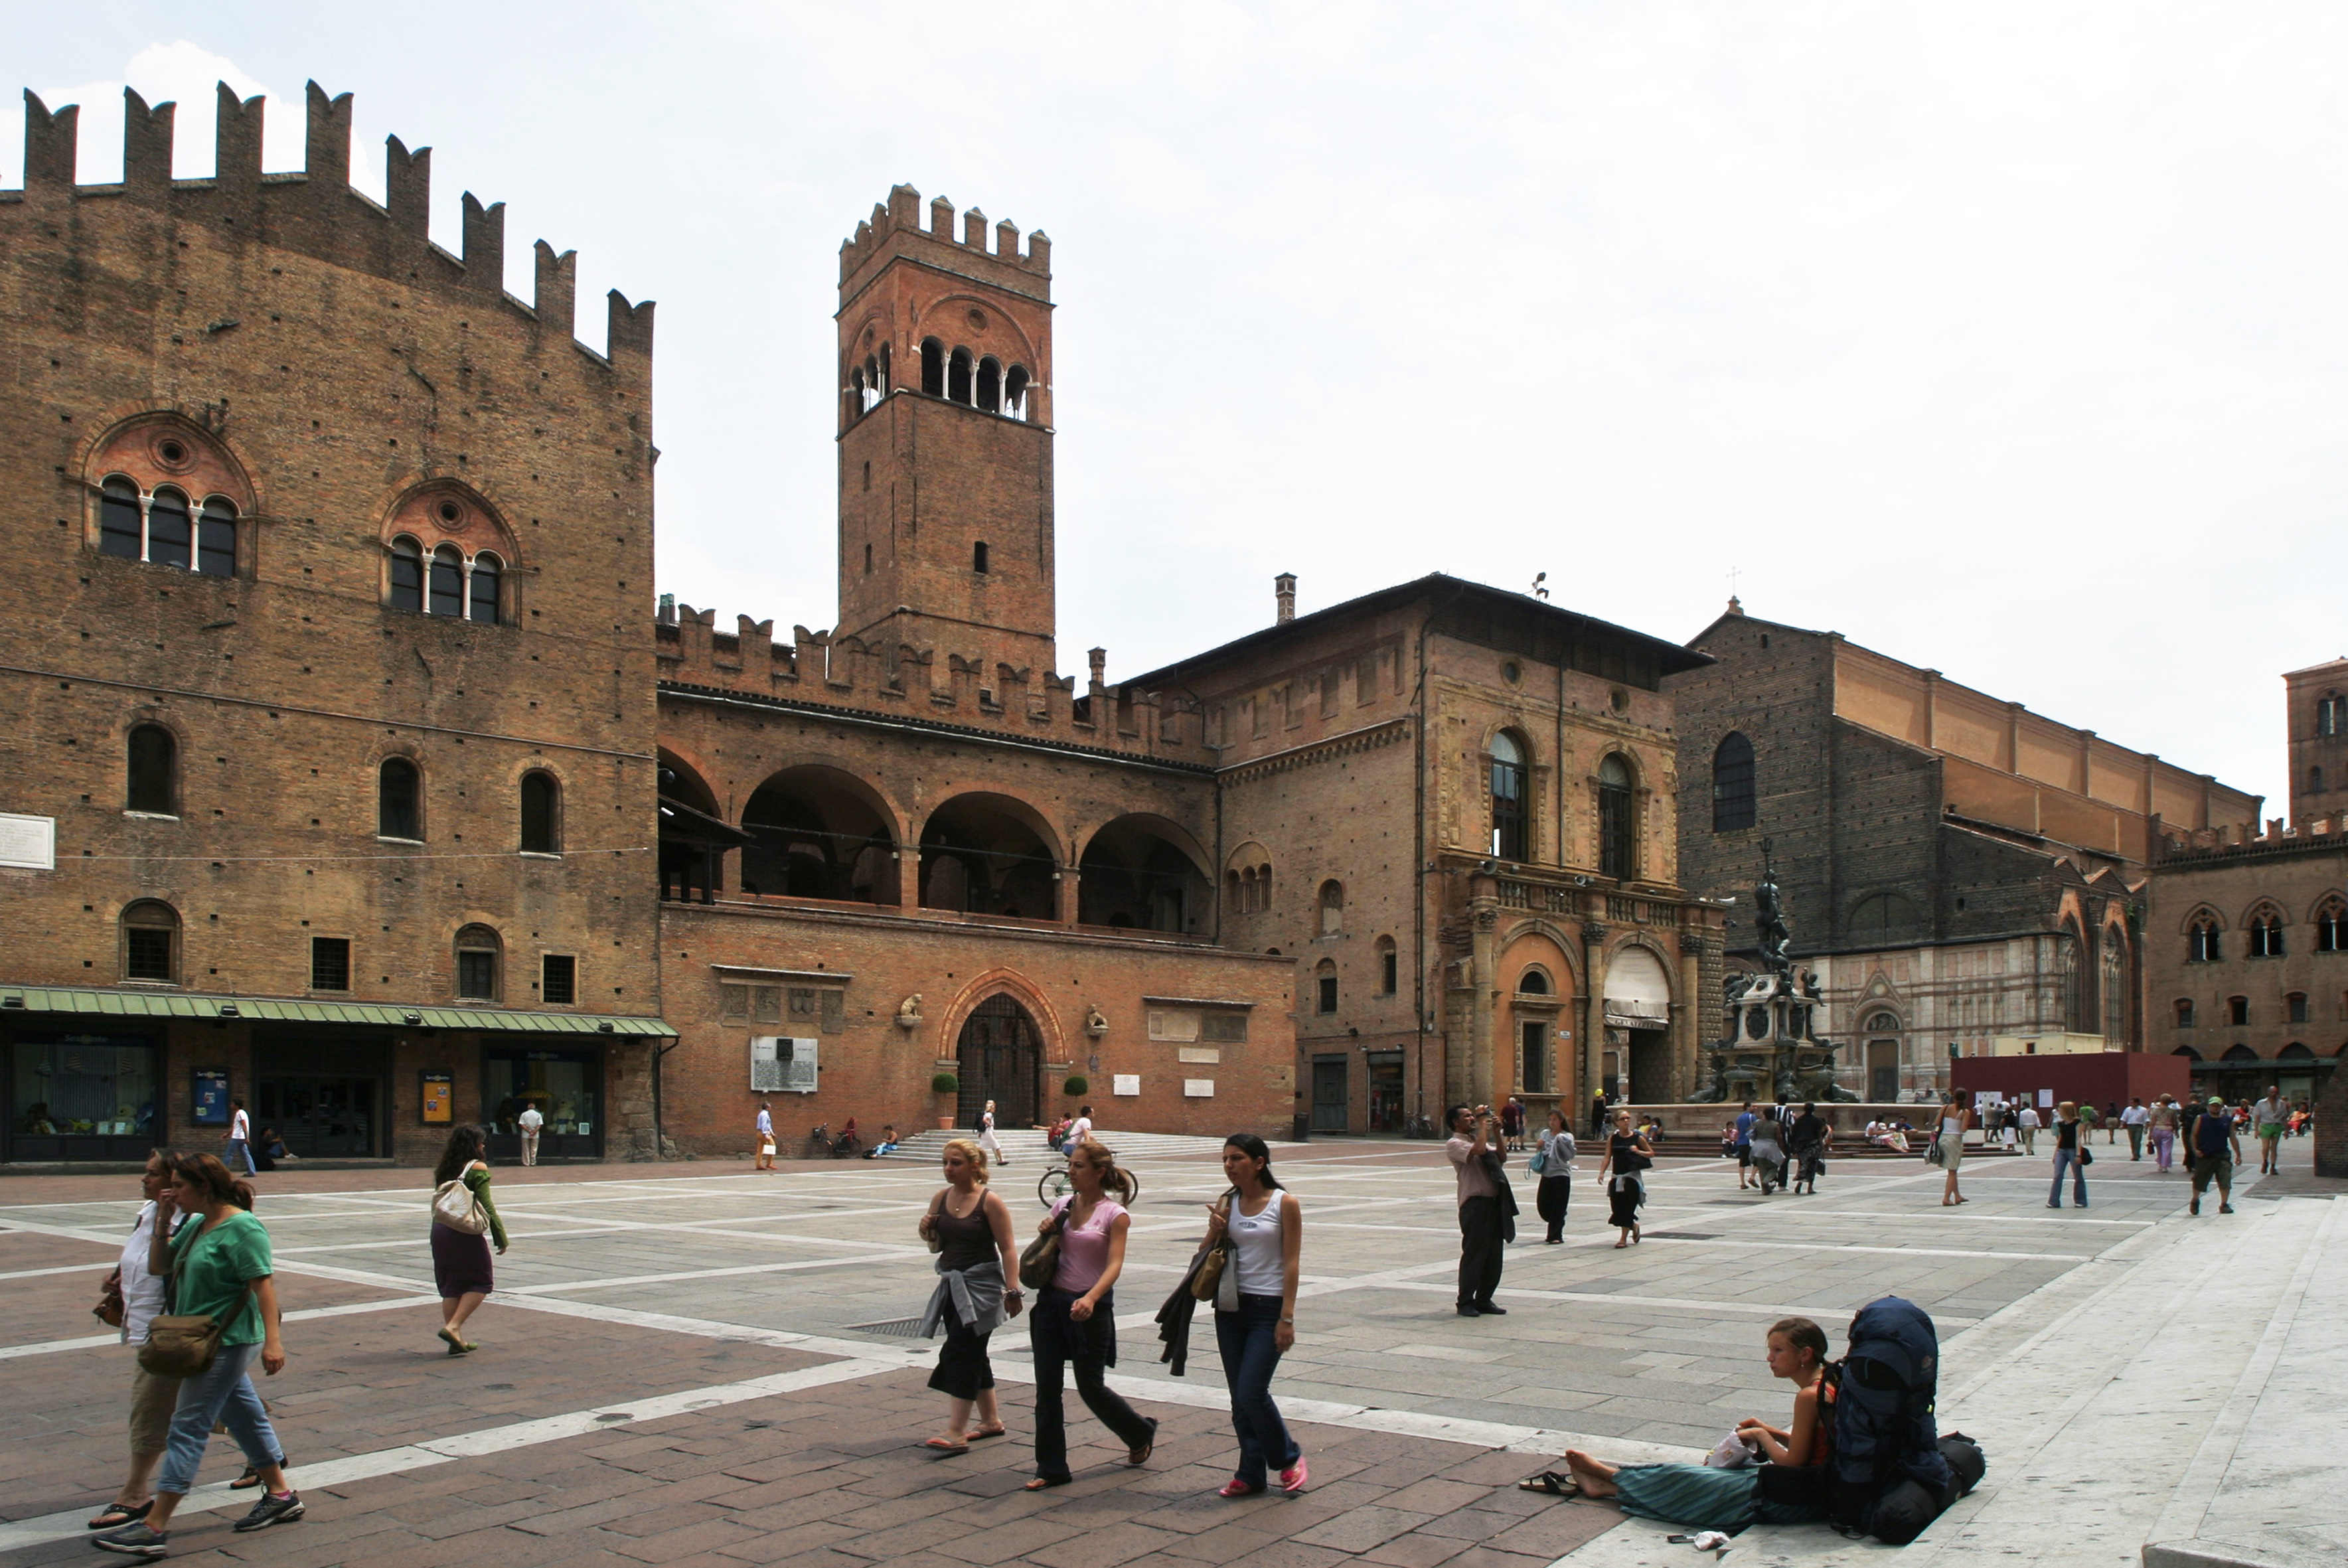 Things to do and see for free in Bologna.